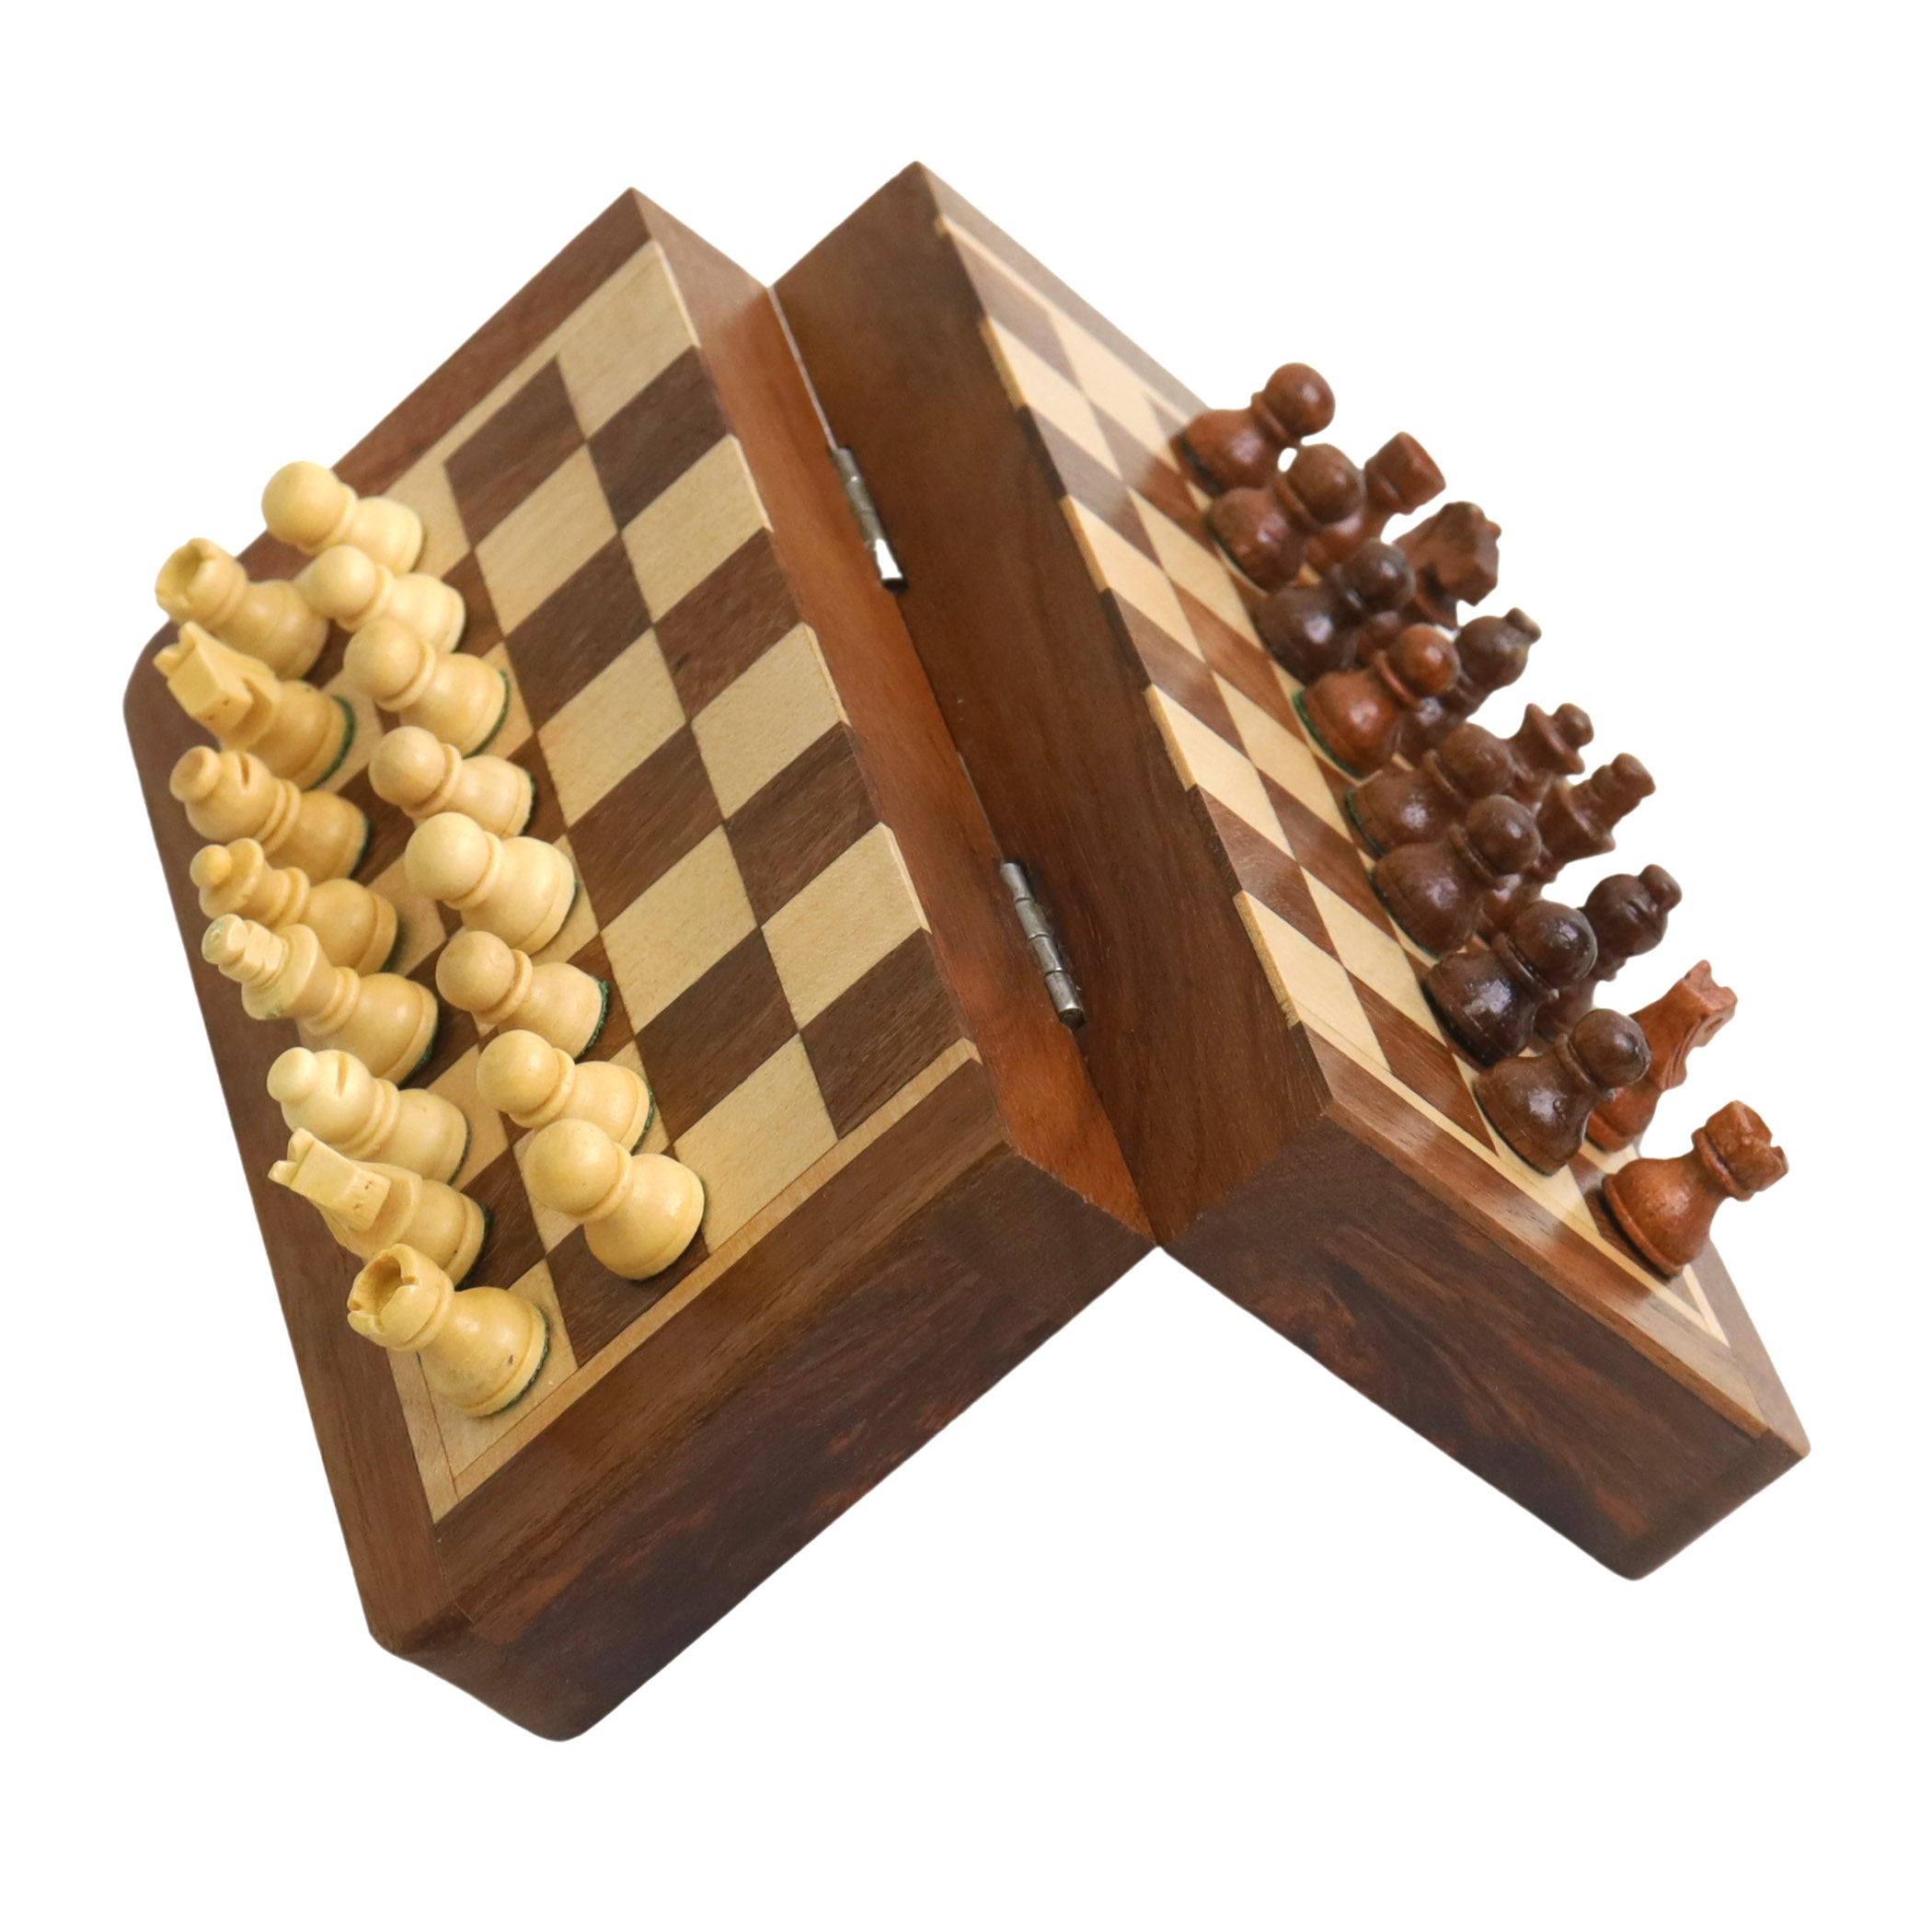 APEQi® Royal Chess Game Wood High Quality Solid Wood 34.5 x 34.5 cm from  the EU, Gift Idea Elegant Chess Board Wood High Quality Folding Chess Box